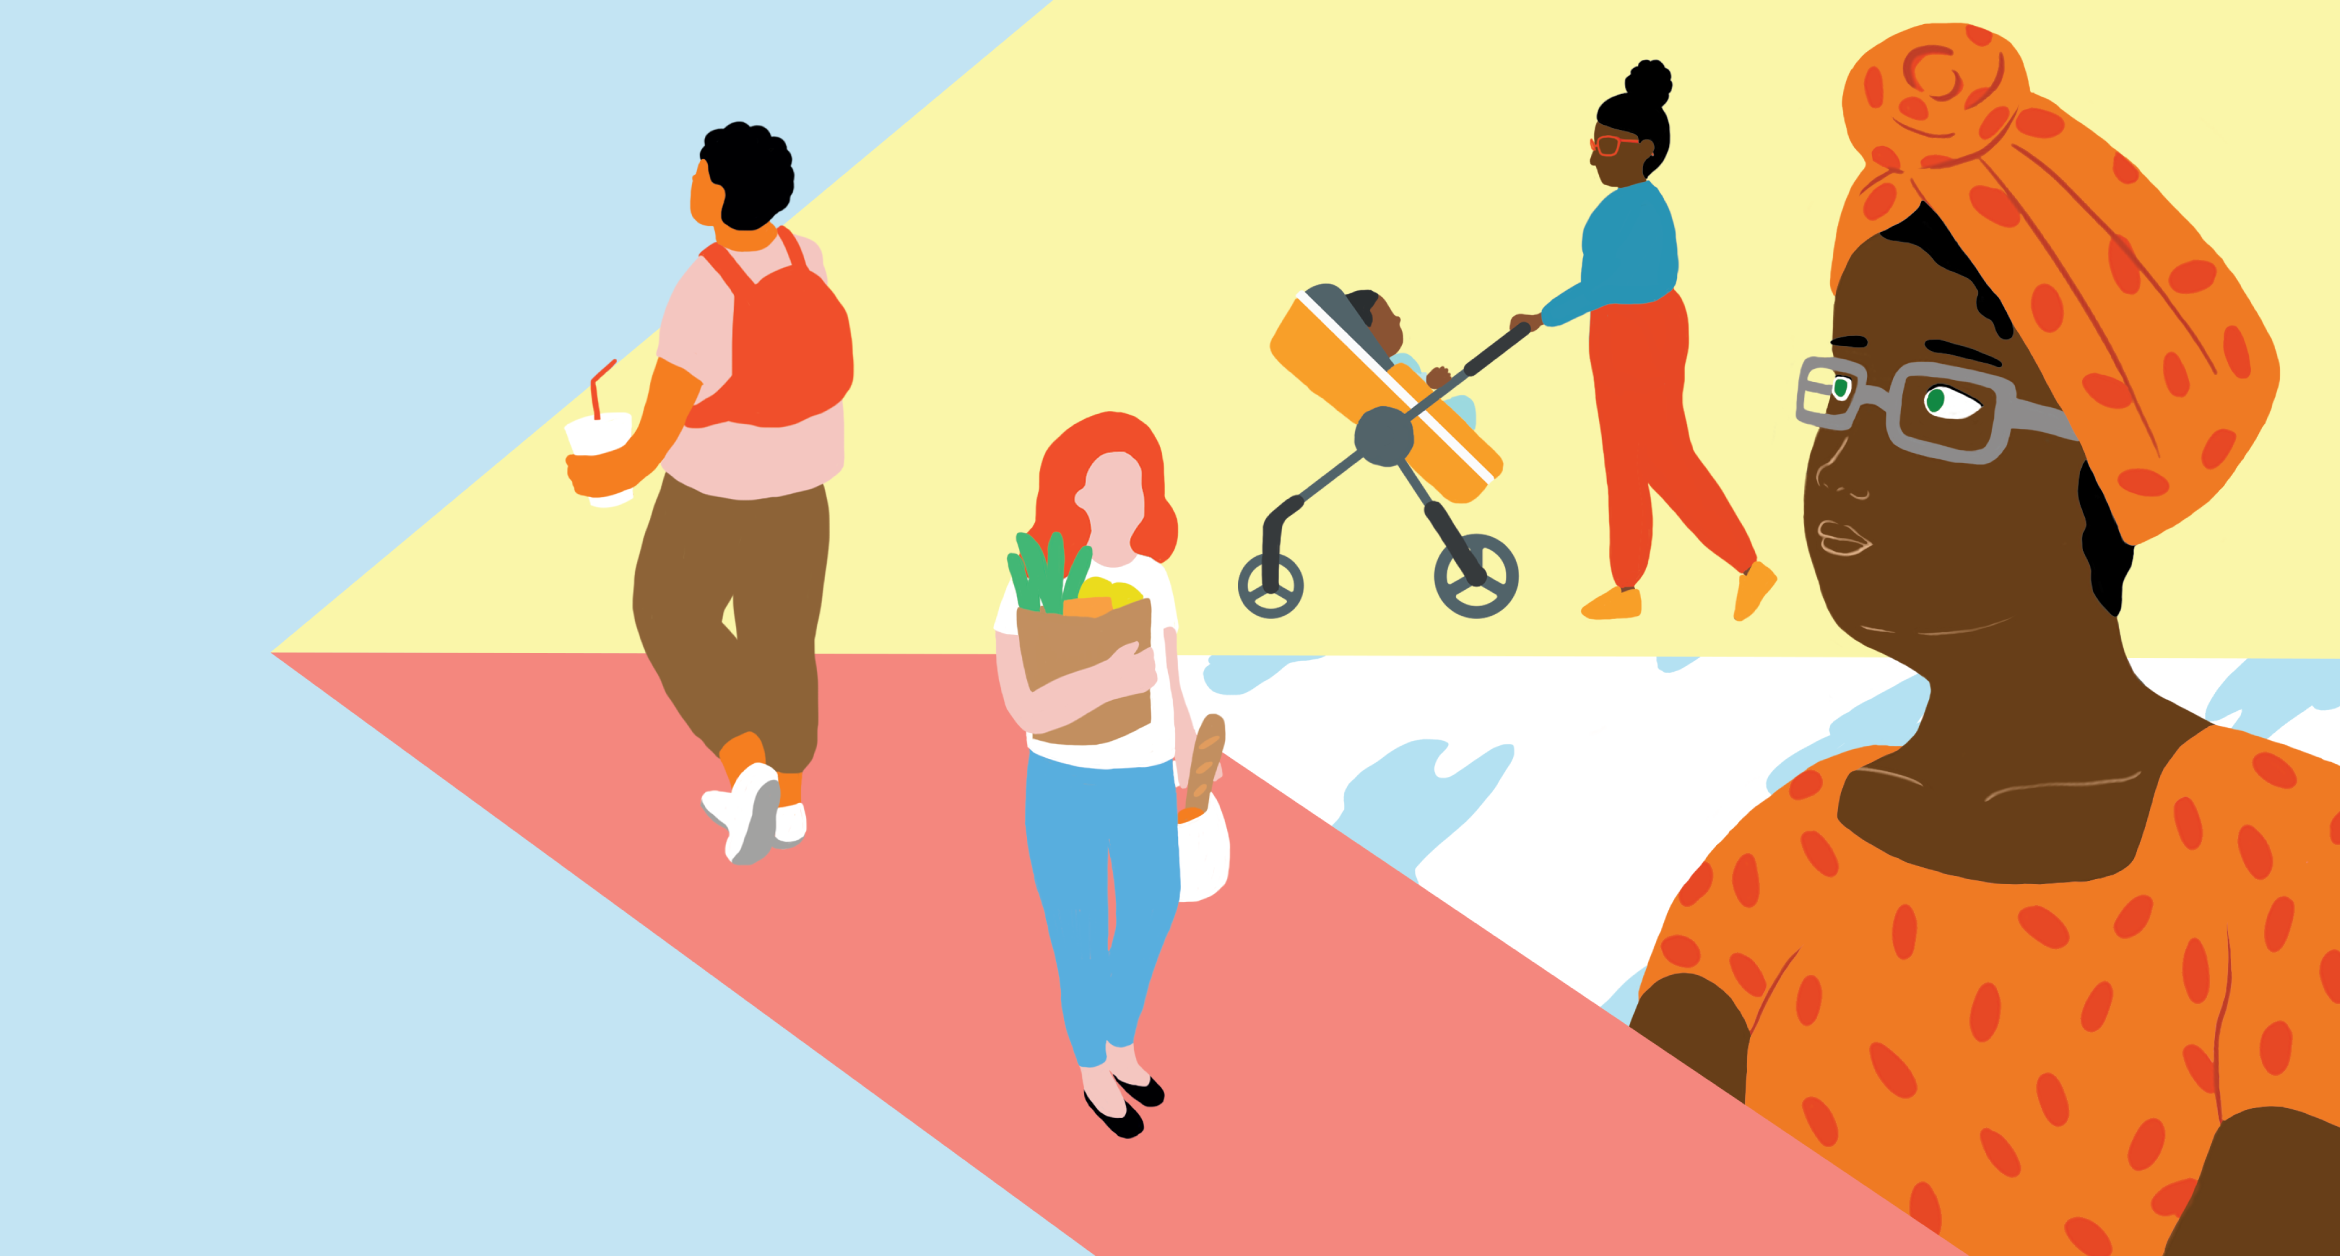 Illustration that was extracted from the cover of the Health System Scenerios publication. The drawing features a diverse group of people, including a mother and child, a person with groceries, person with a drink and backpack and a woman in the foreground wearing a head wrap.